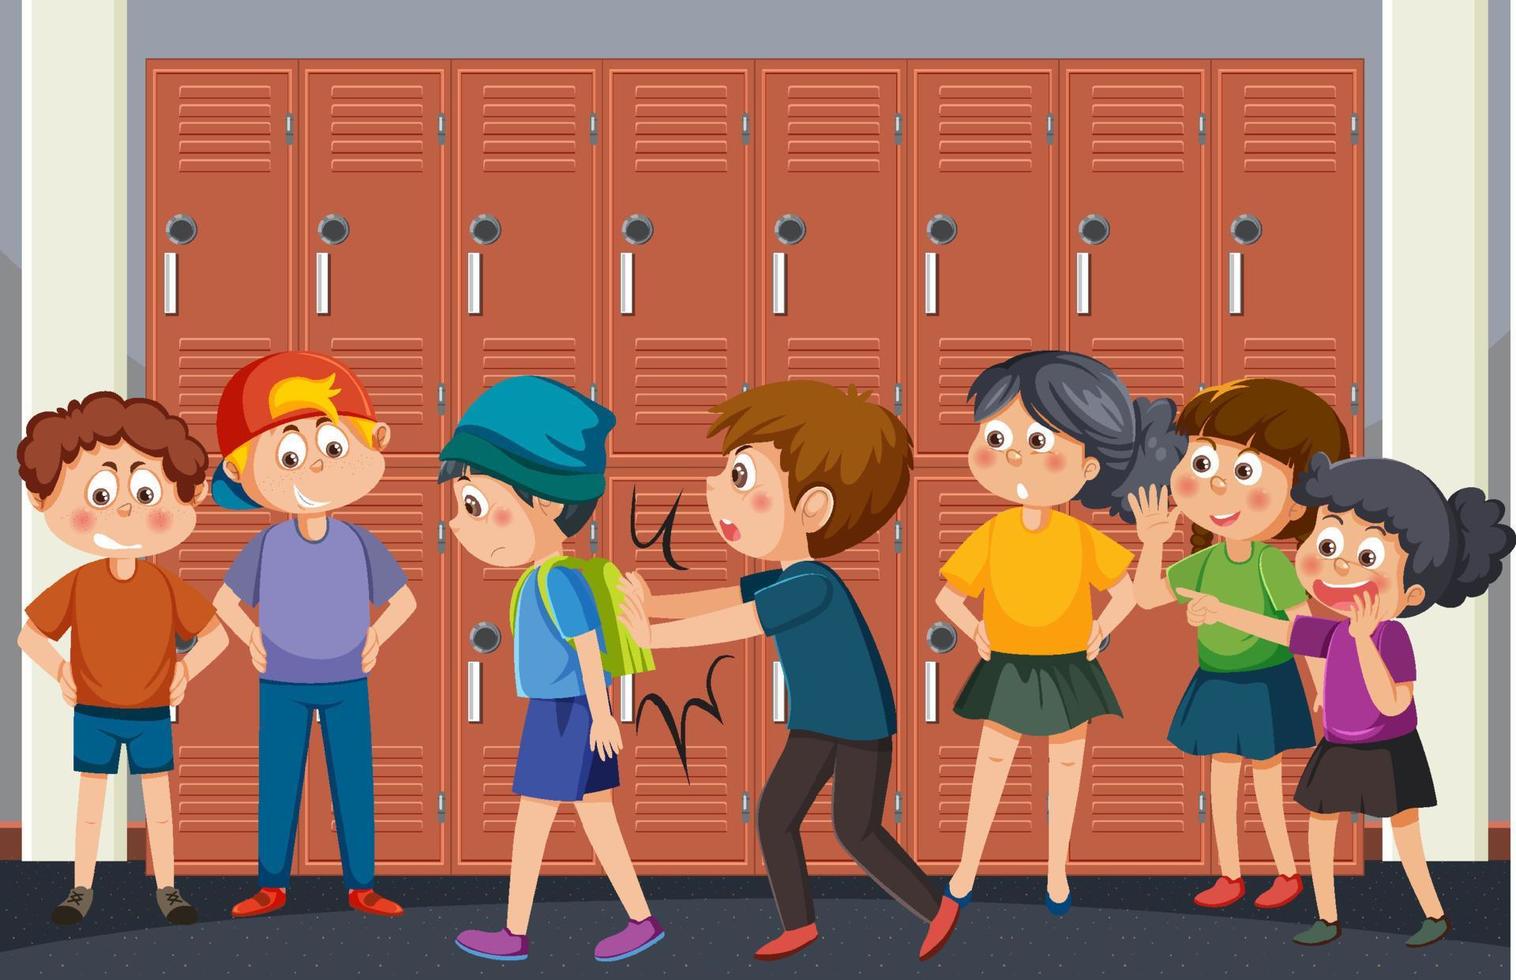 Kids bullying their friend at school vector